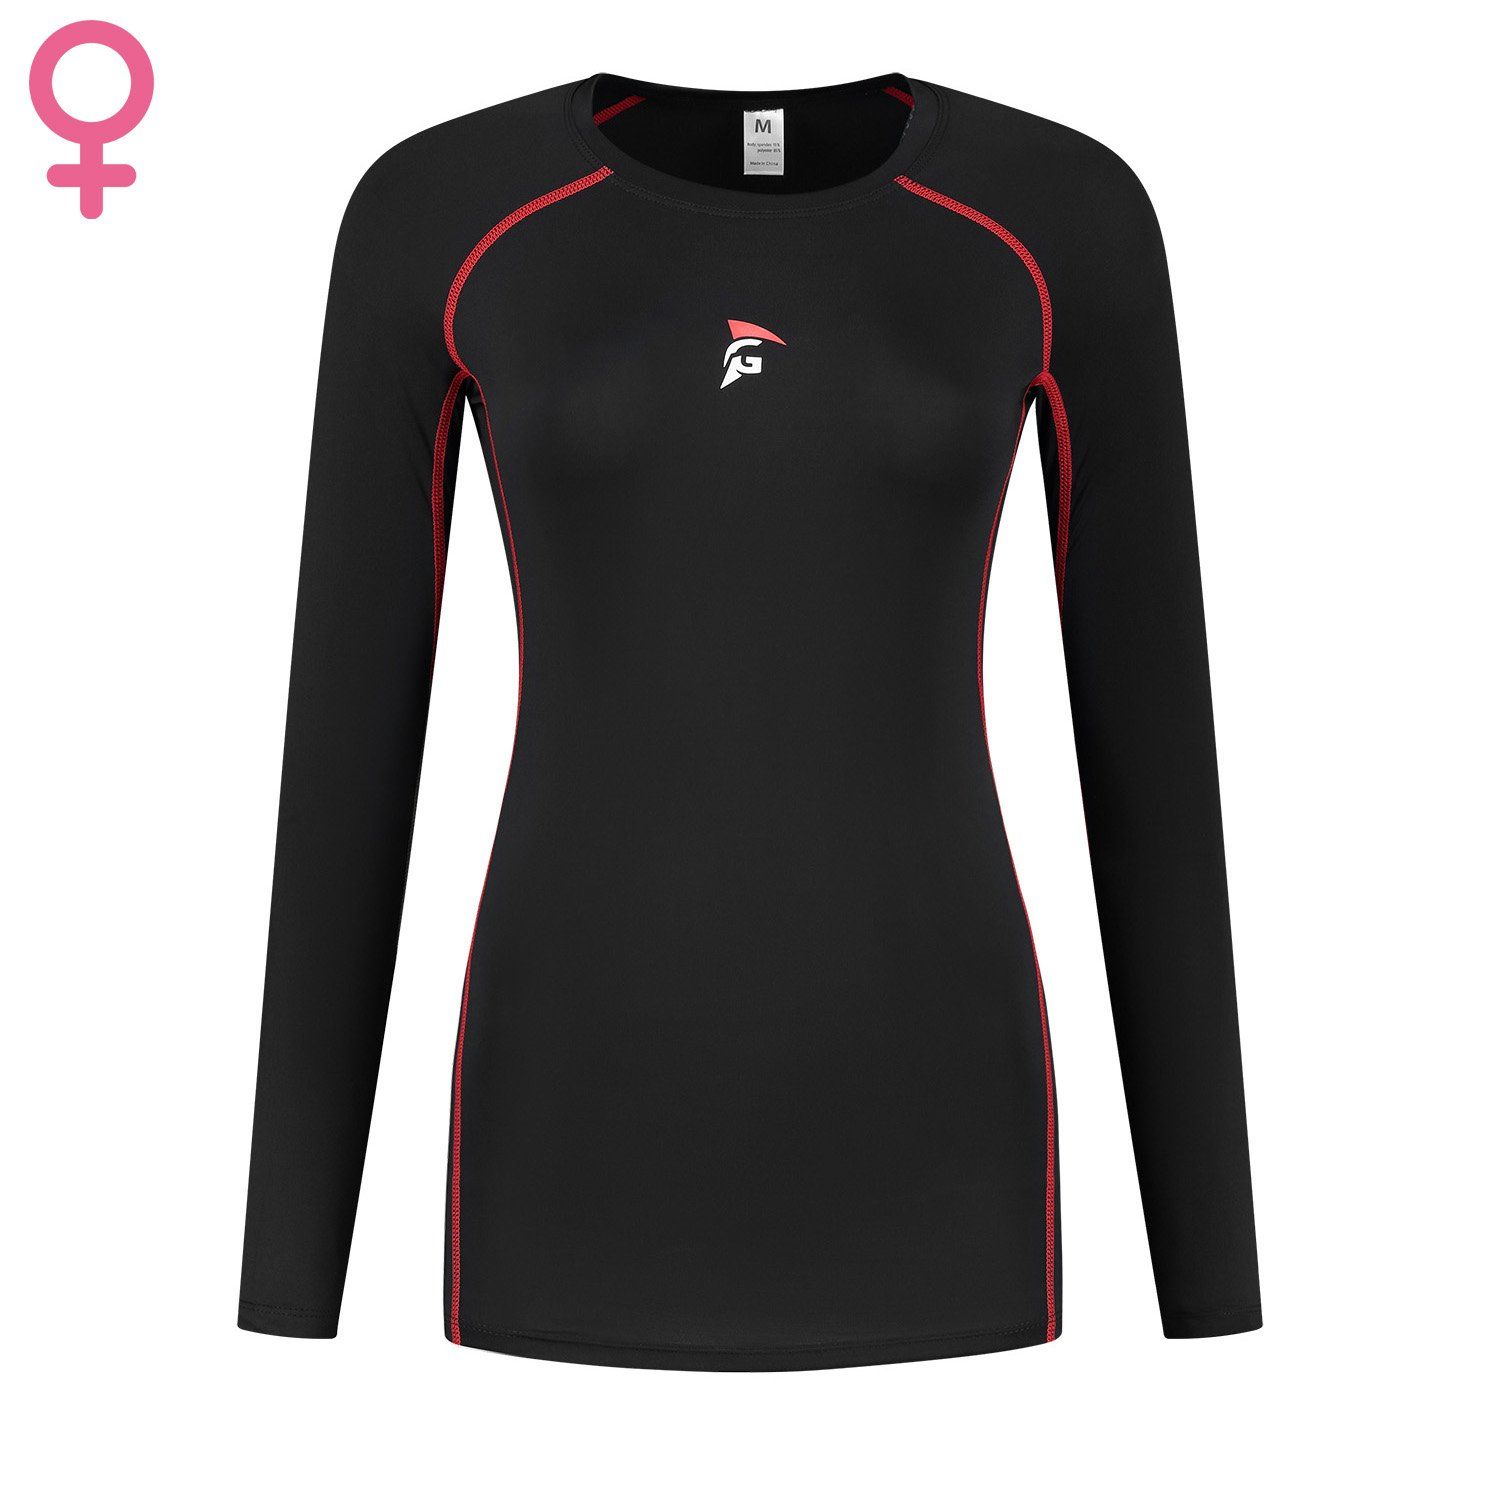 gladiator sports longsleeve compression top for woman front